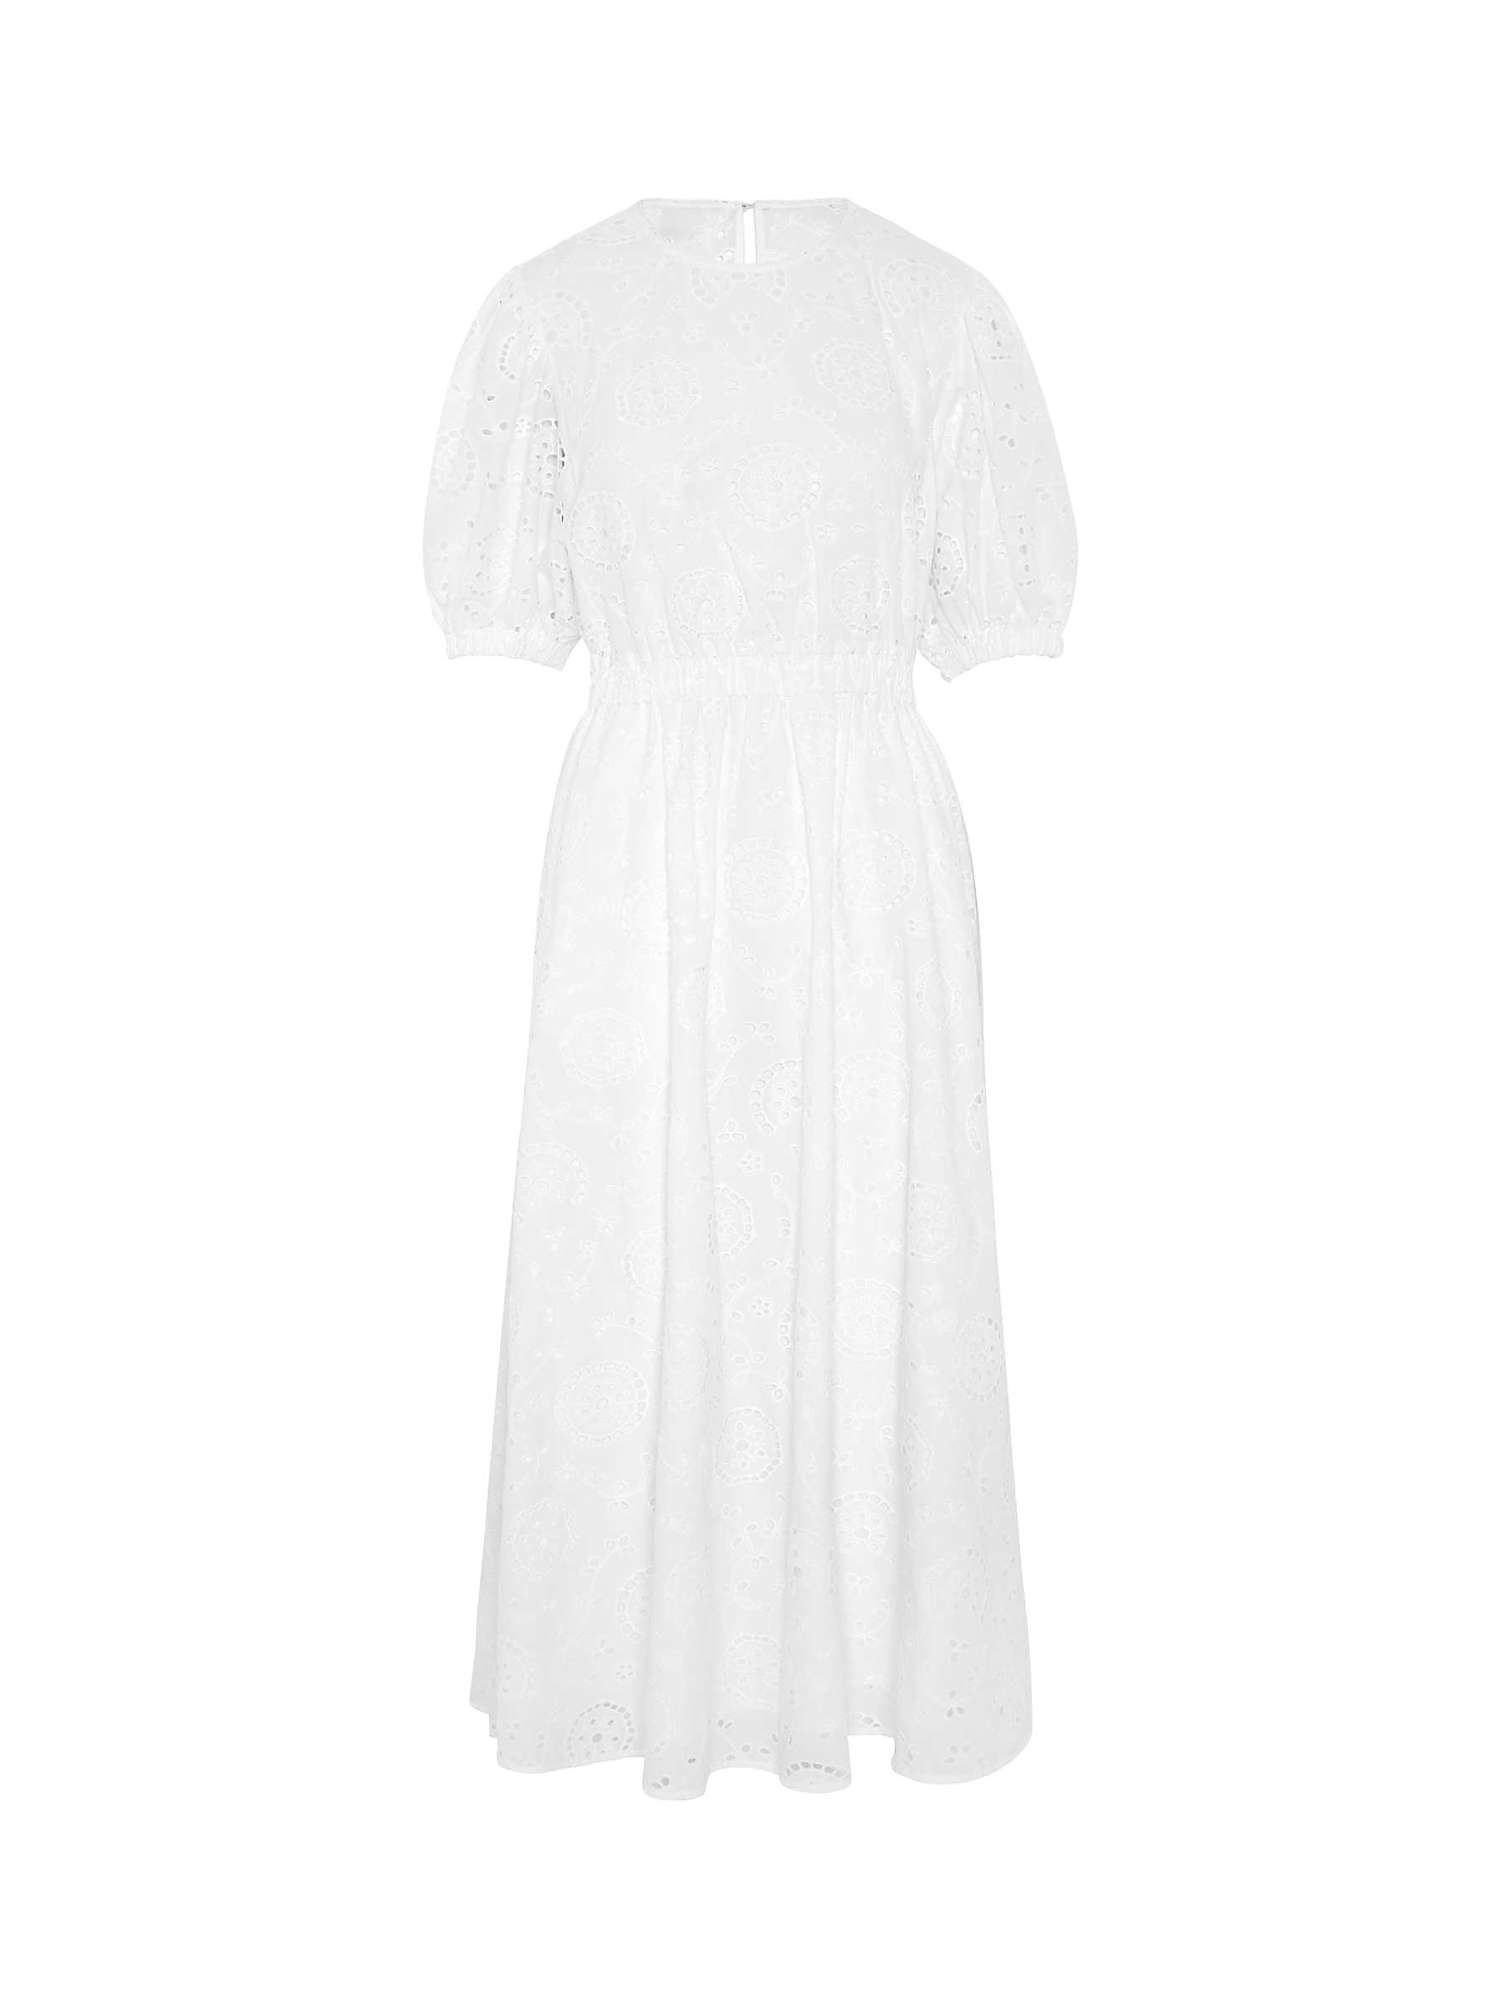 Buy Vivere By Savannah Miller Stella Broderie Anglaise Maxi Dress, White Online at johnlewis.com